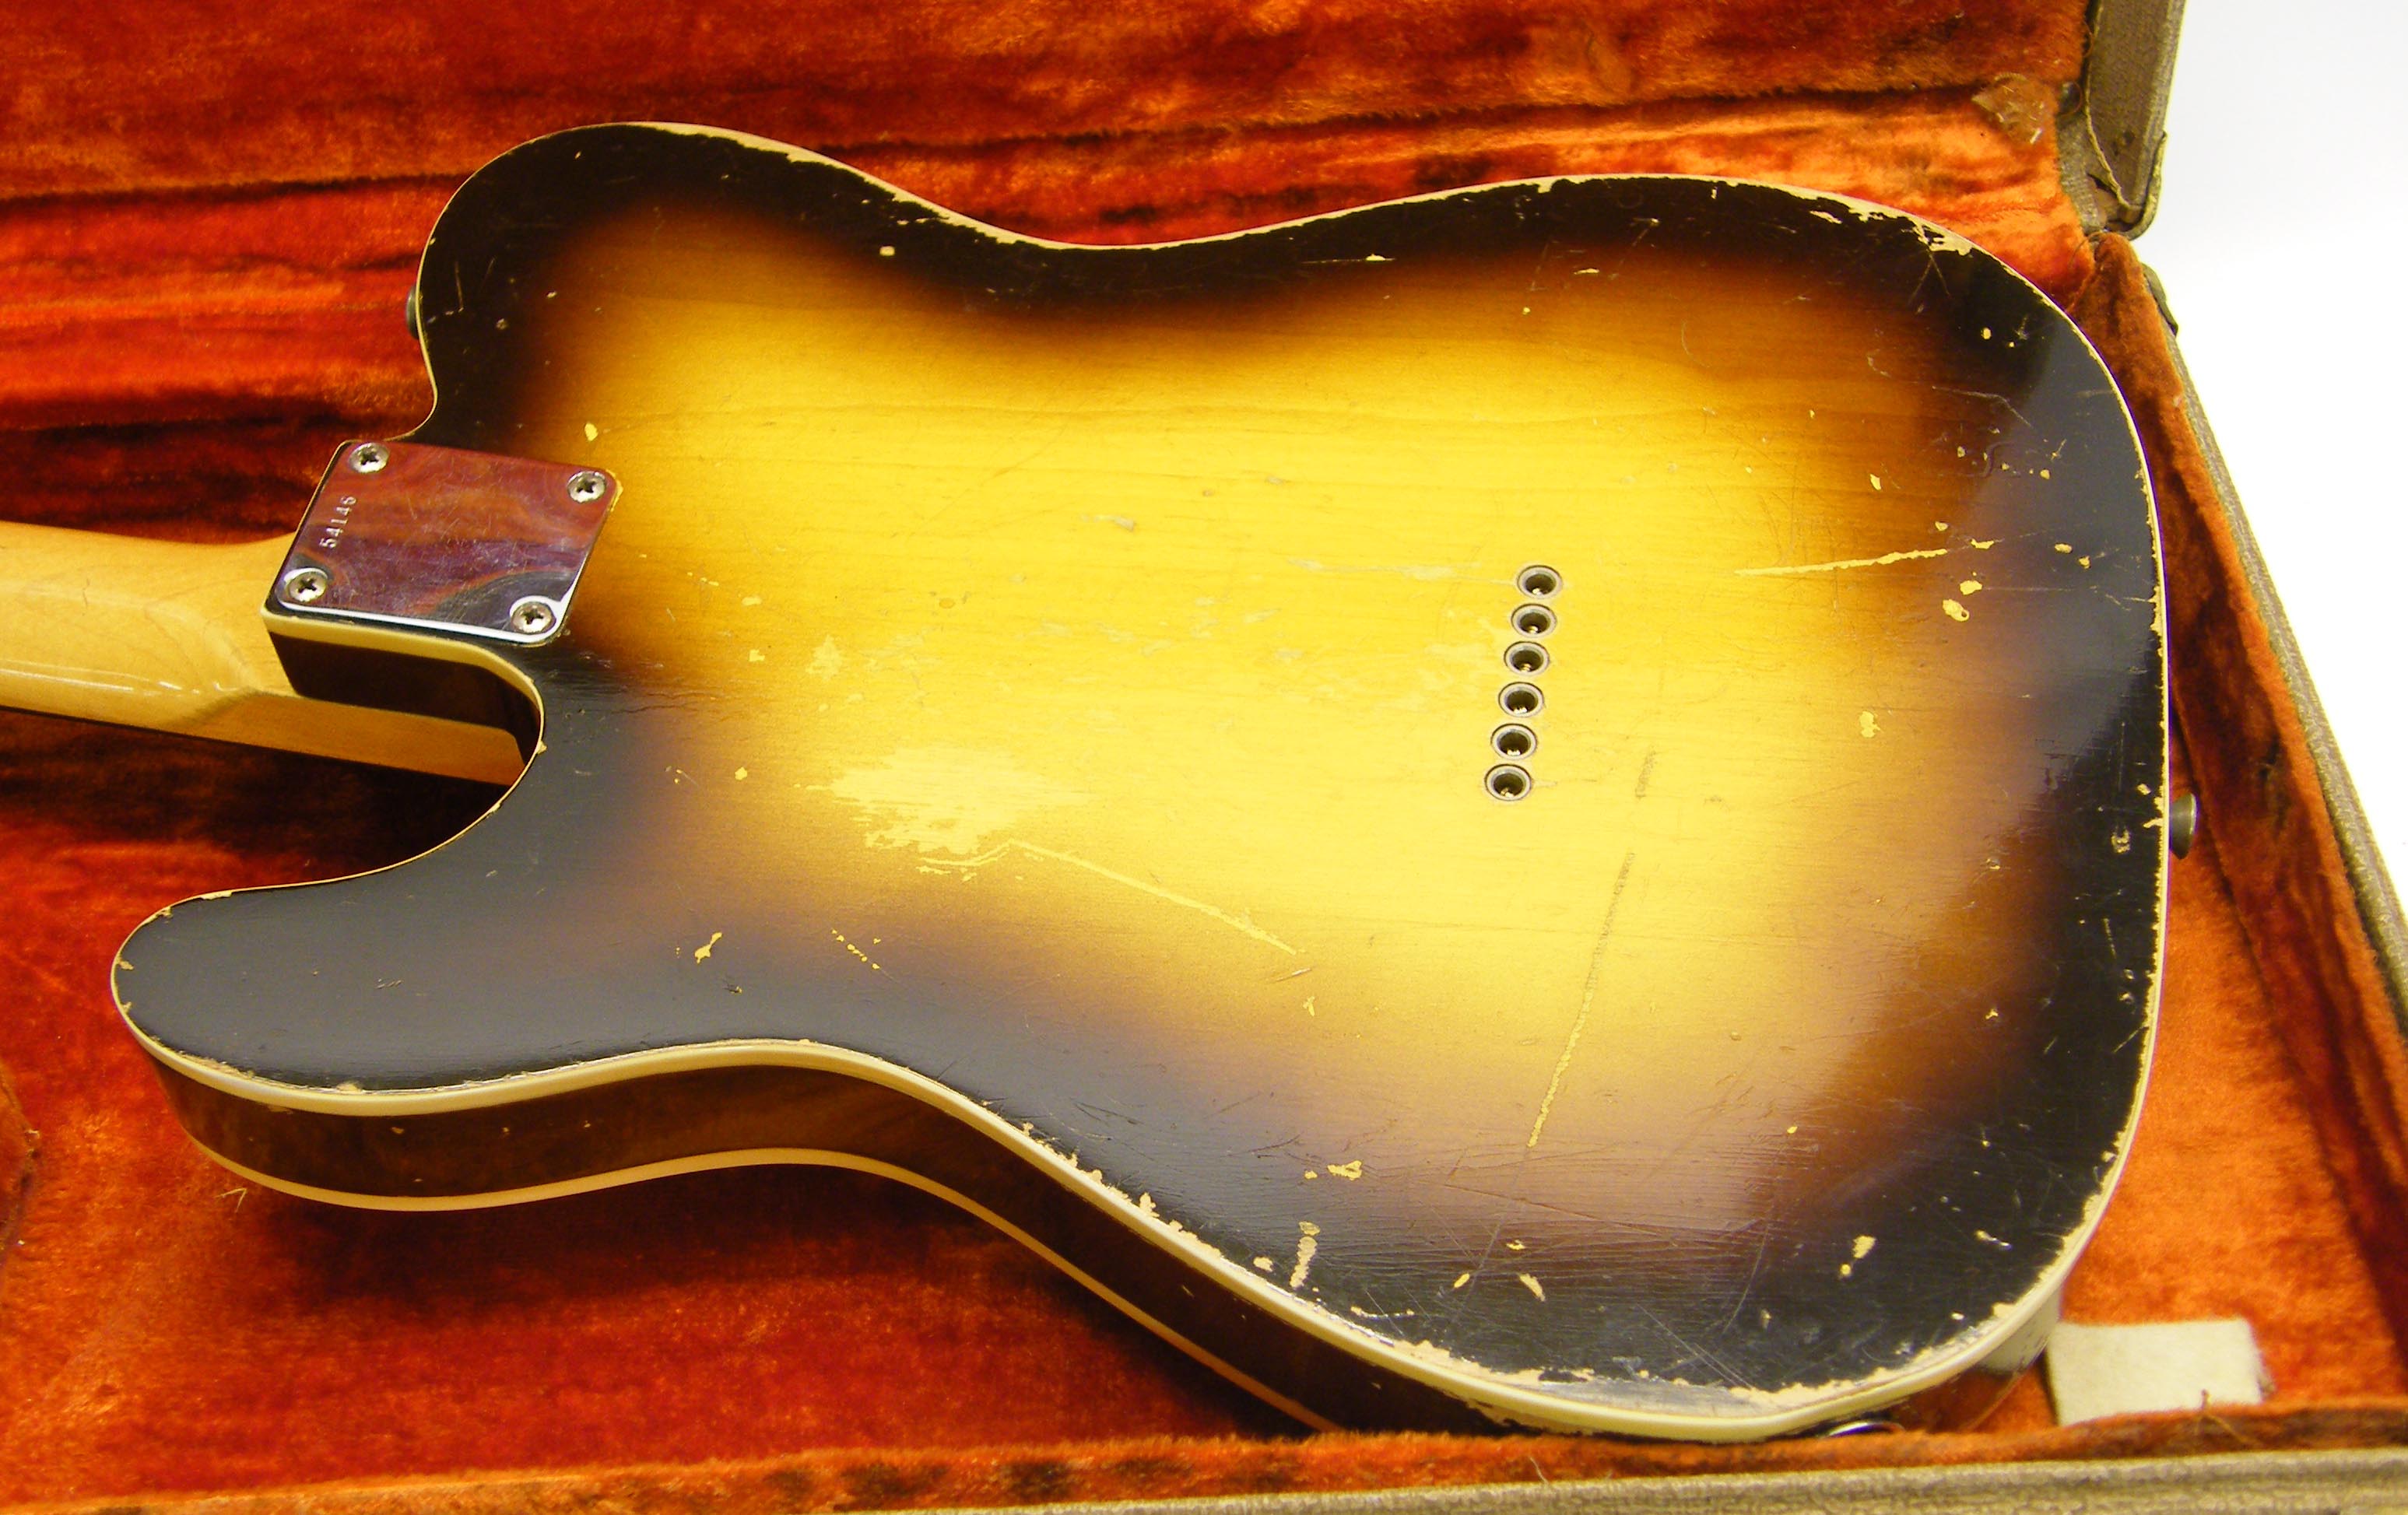 1960 Fender Custom Esquire electric guitar, made in USA, ser. no. 54146, sunburst finish with - Image 4 of 8